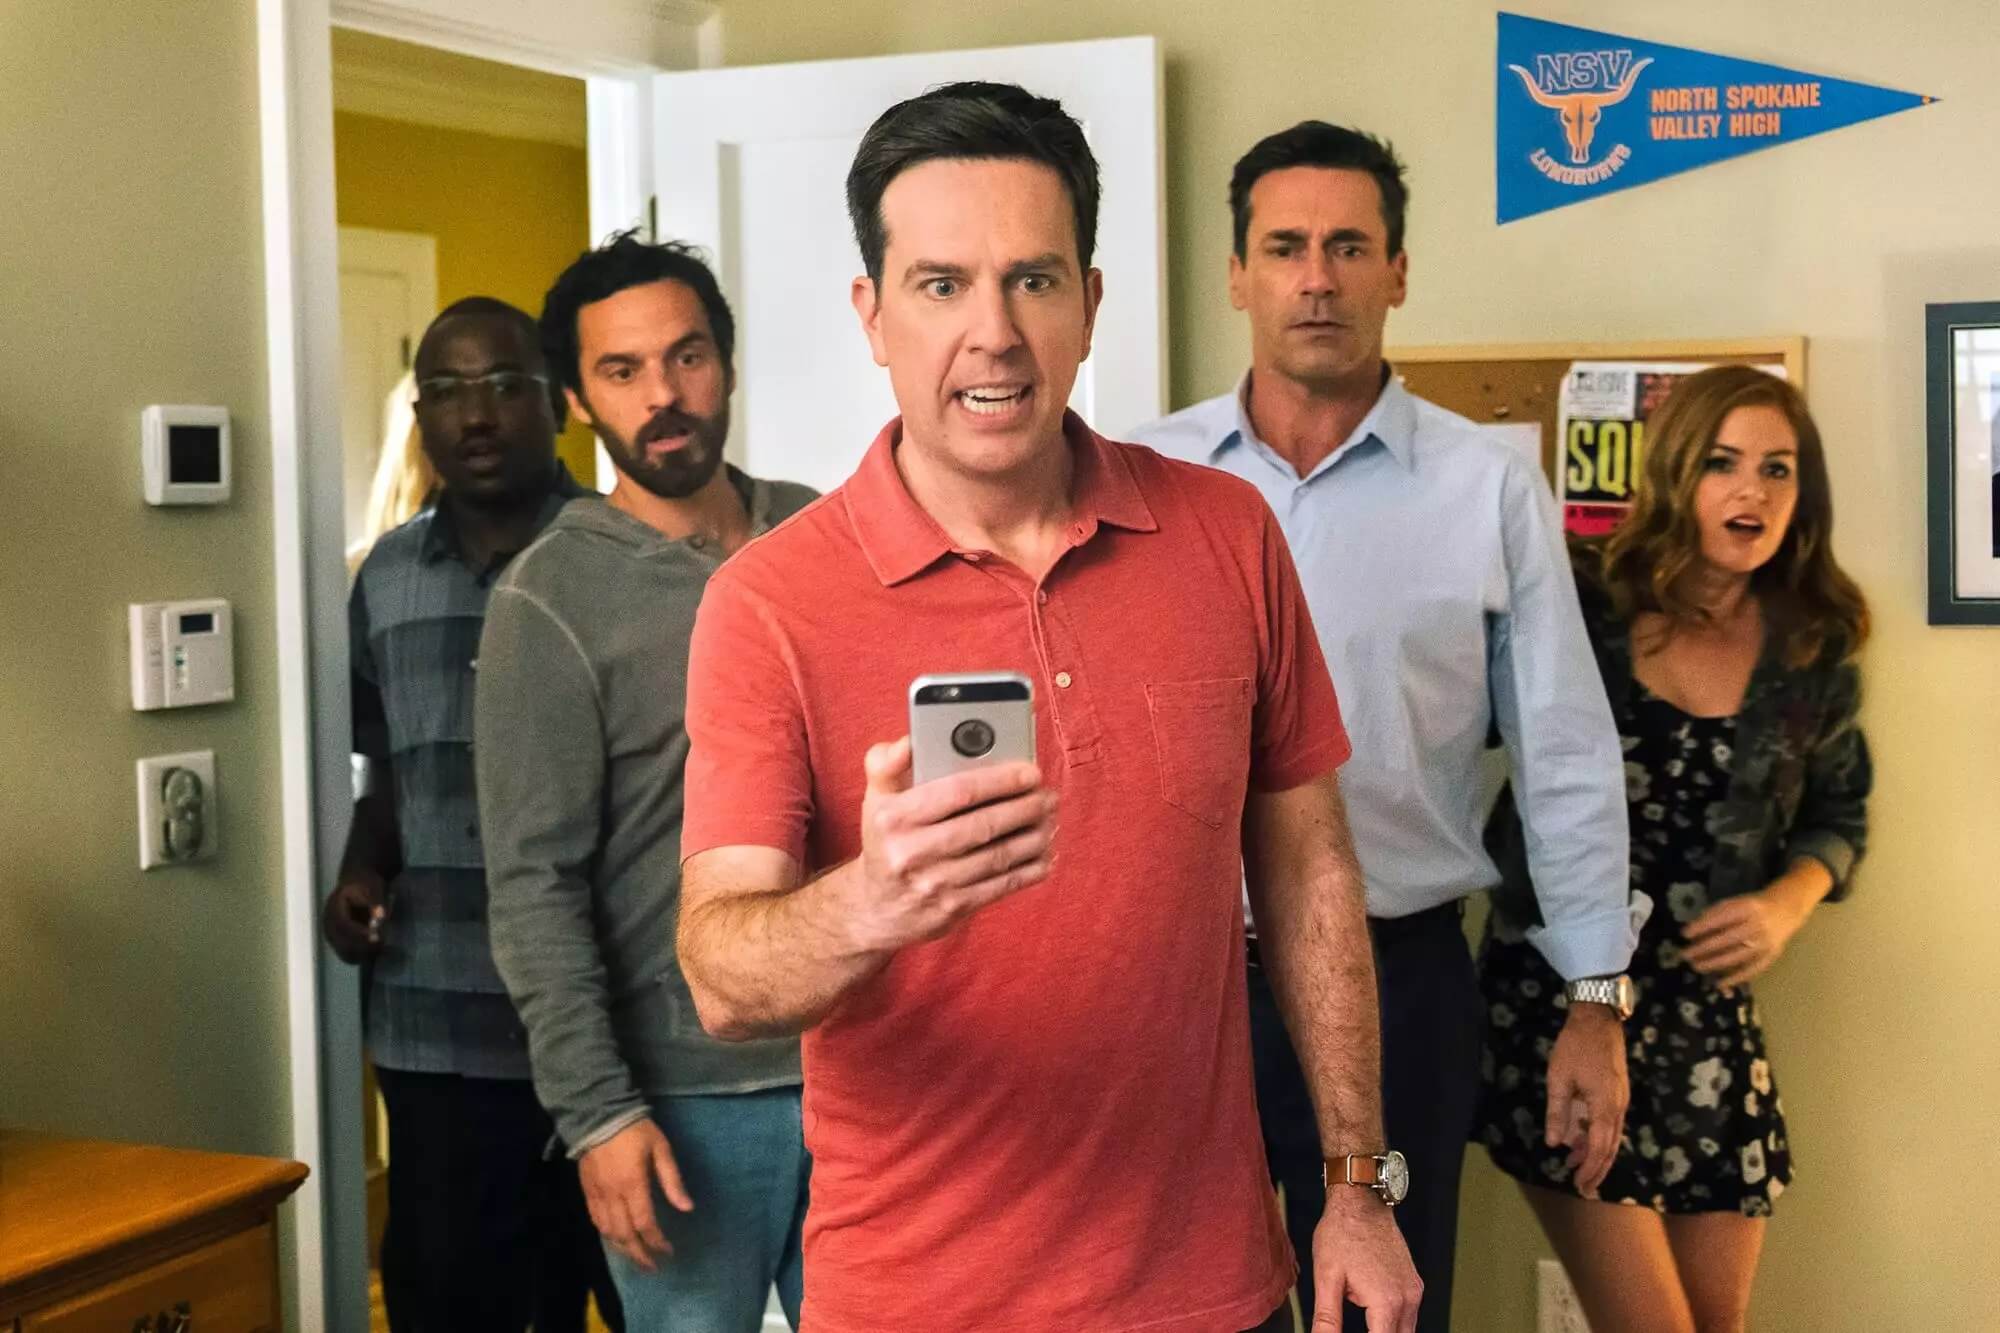 Tag star Ed Helms to star in Family Leave